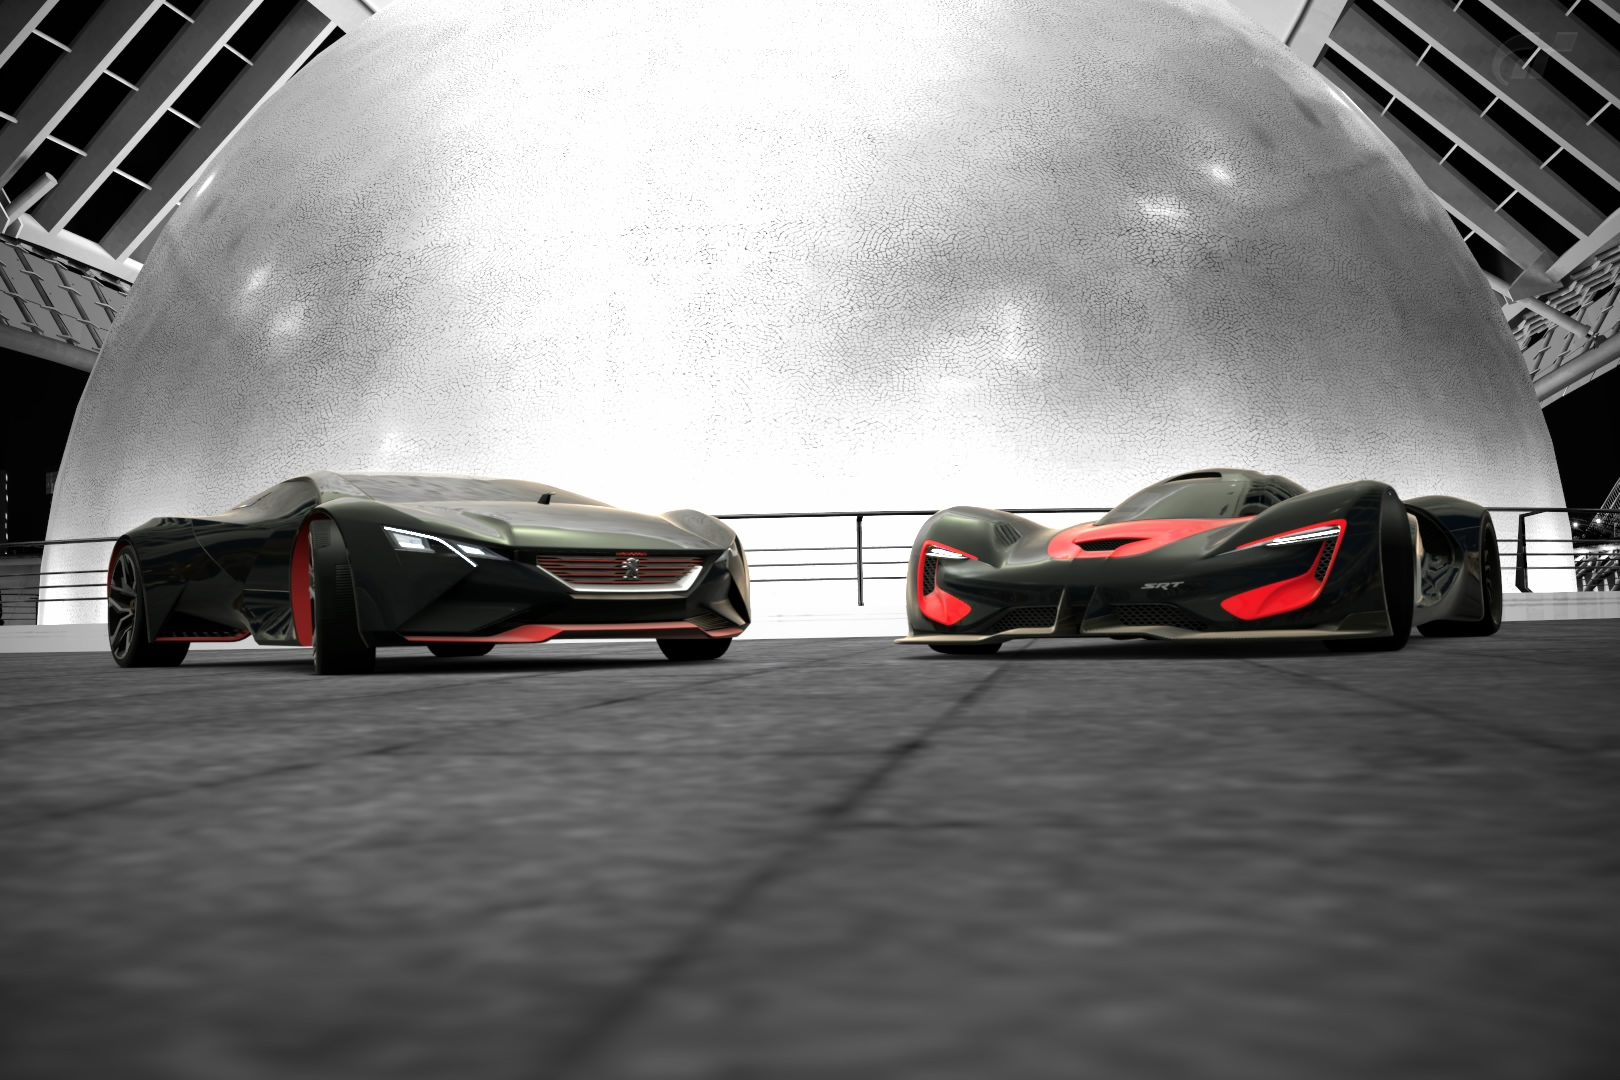 Red Heads From The Future Peugeot Vgt And Srt Tomahawk X At Valencia Gtplanet